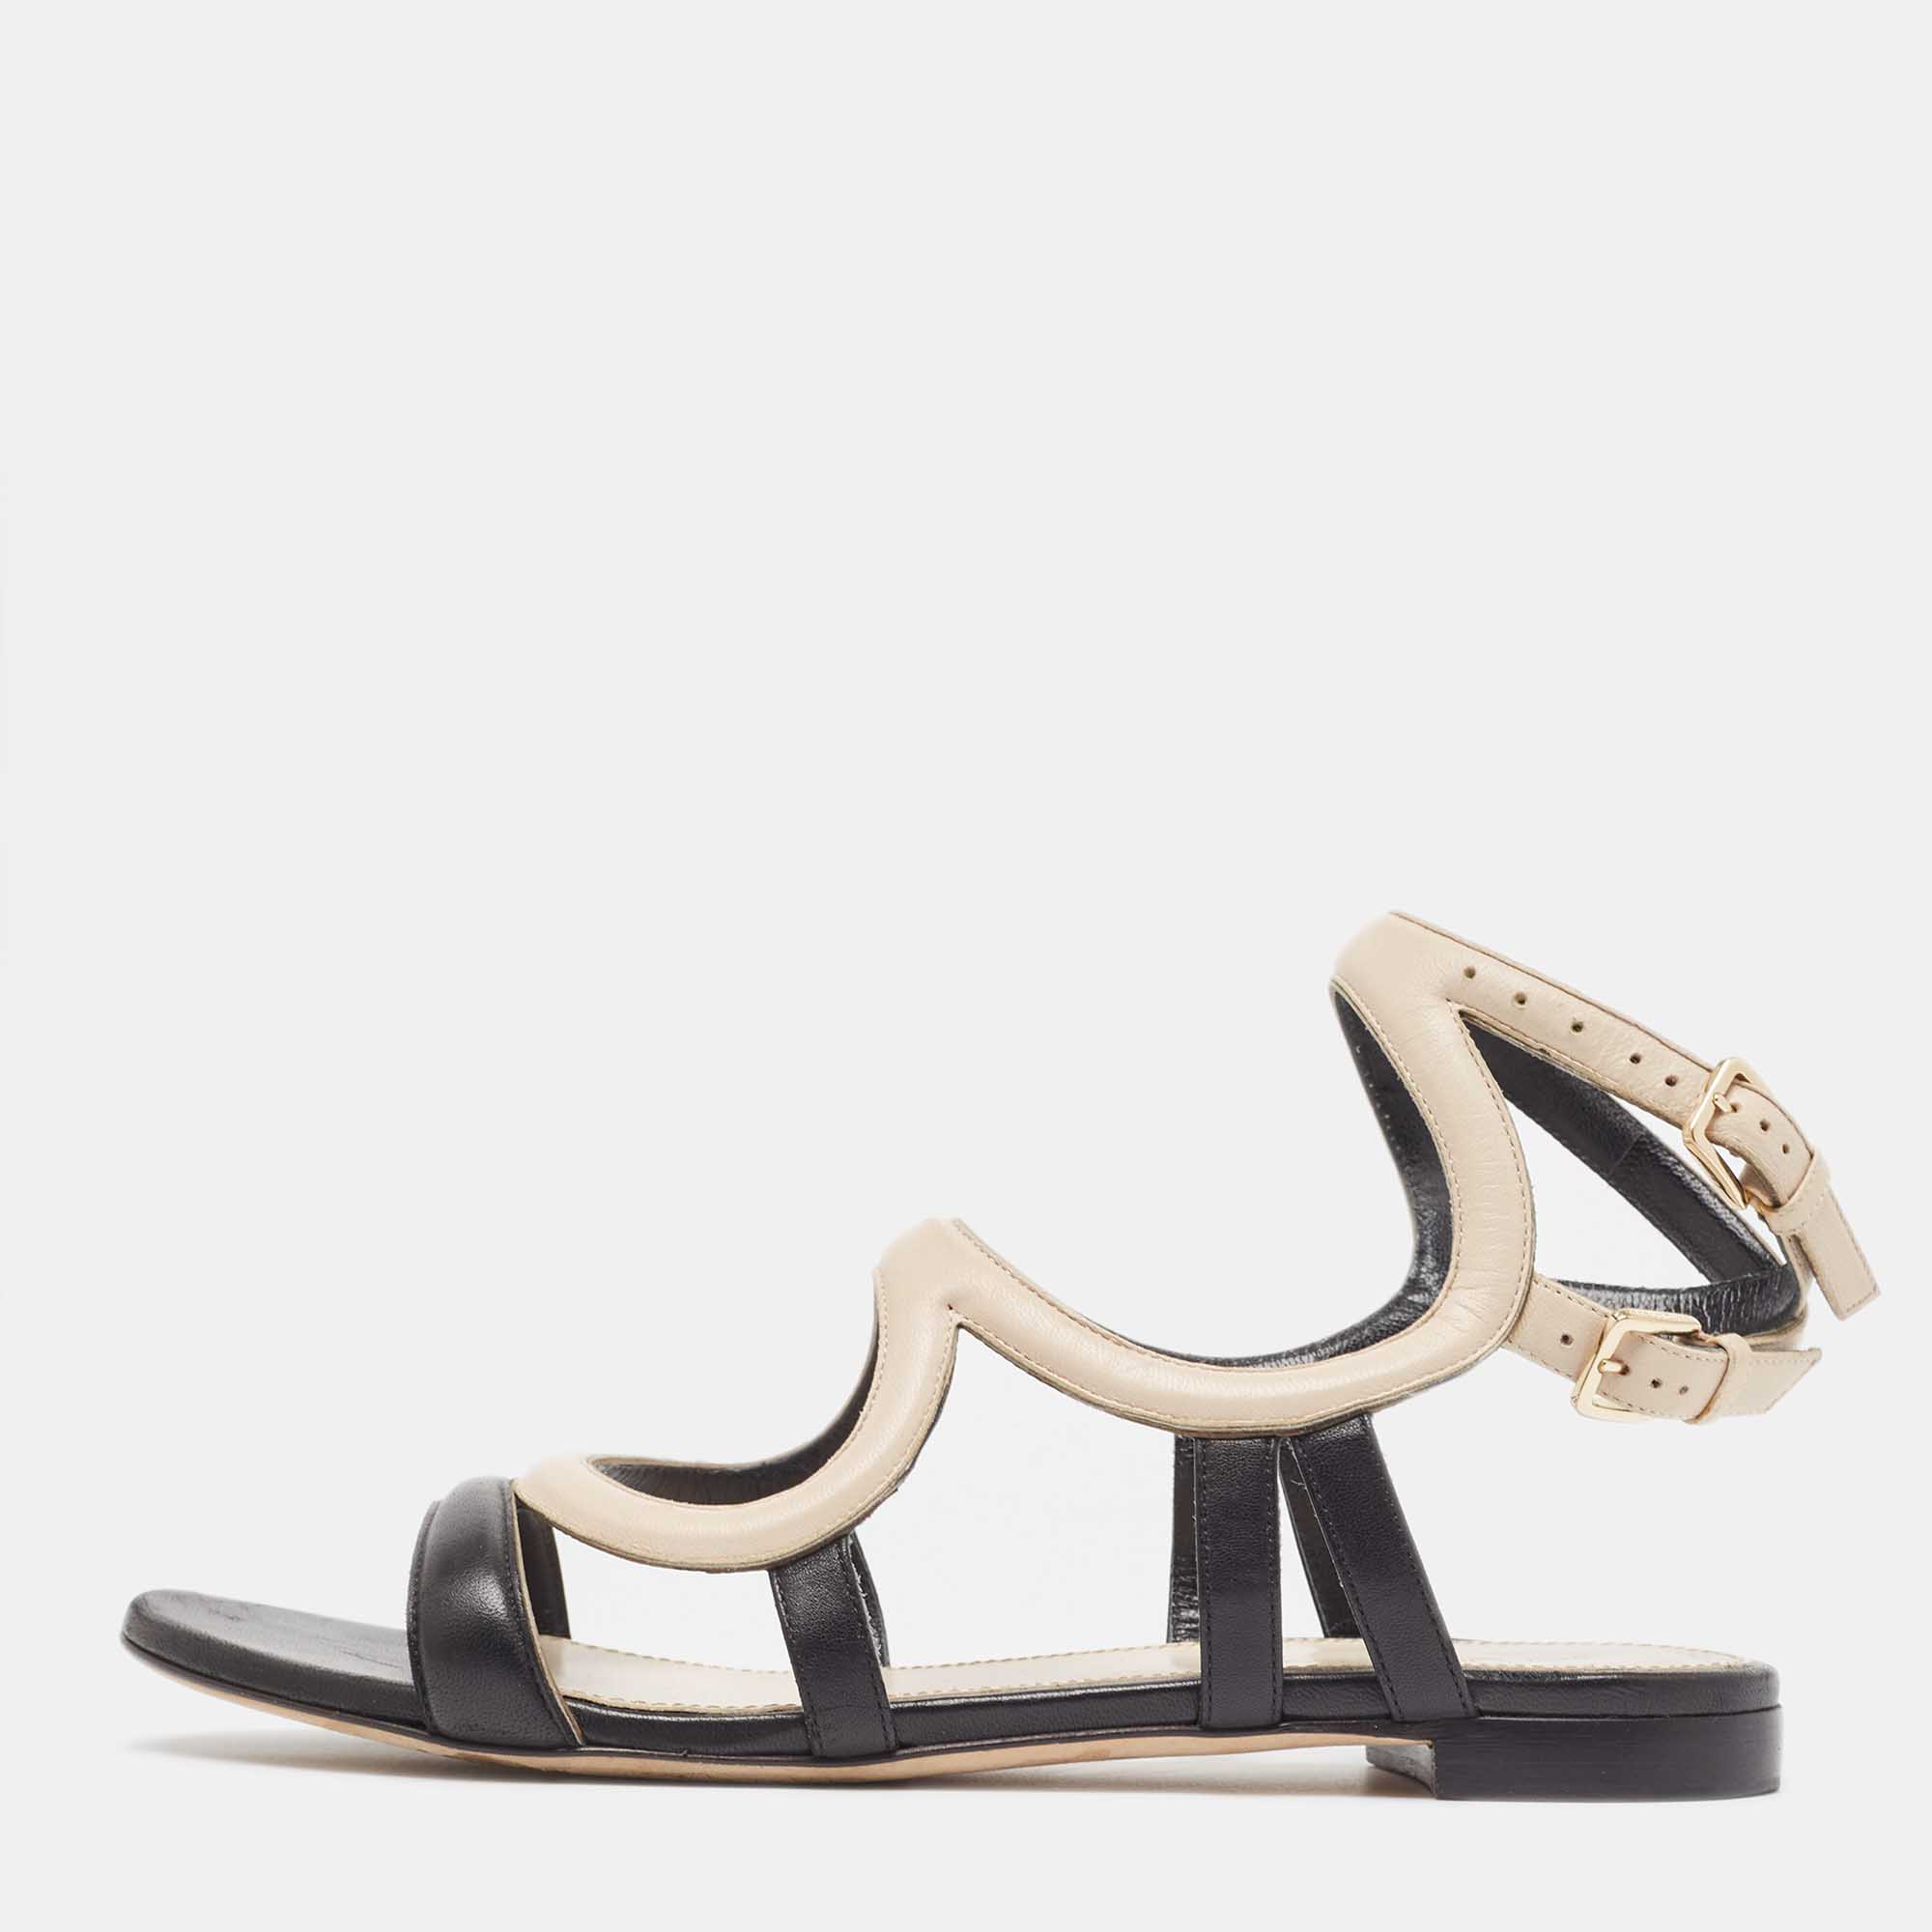 Sergio rossi black/cream leather flat ankle strap sandals size 39